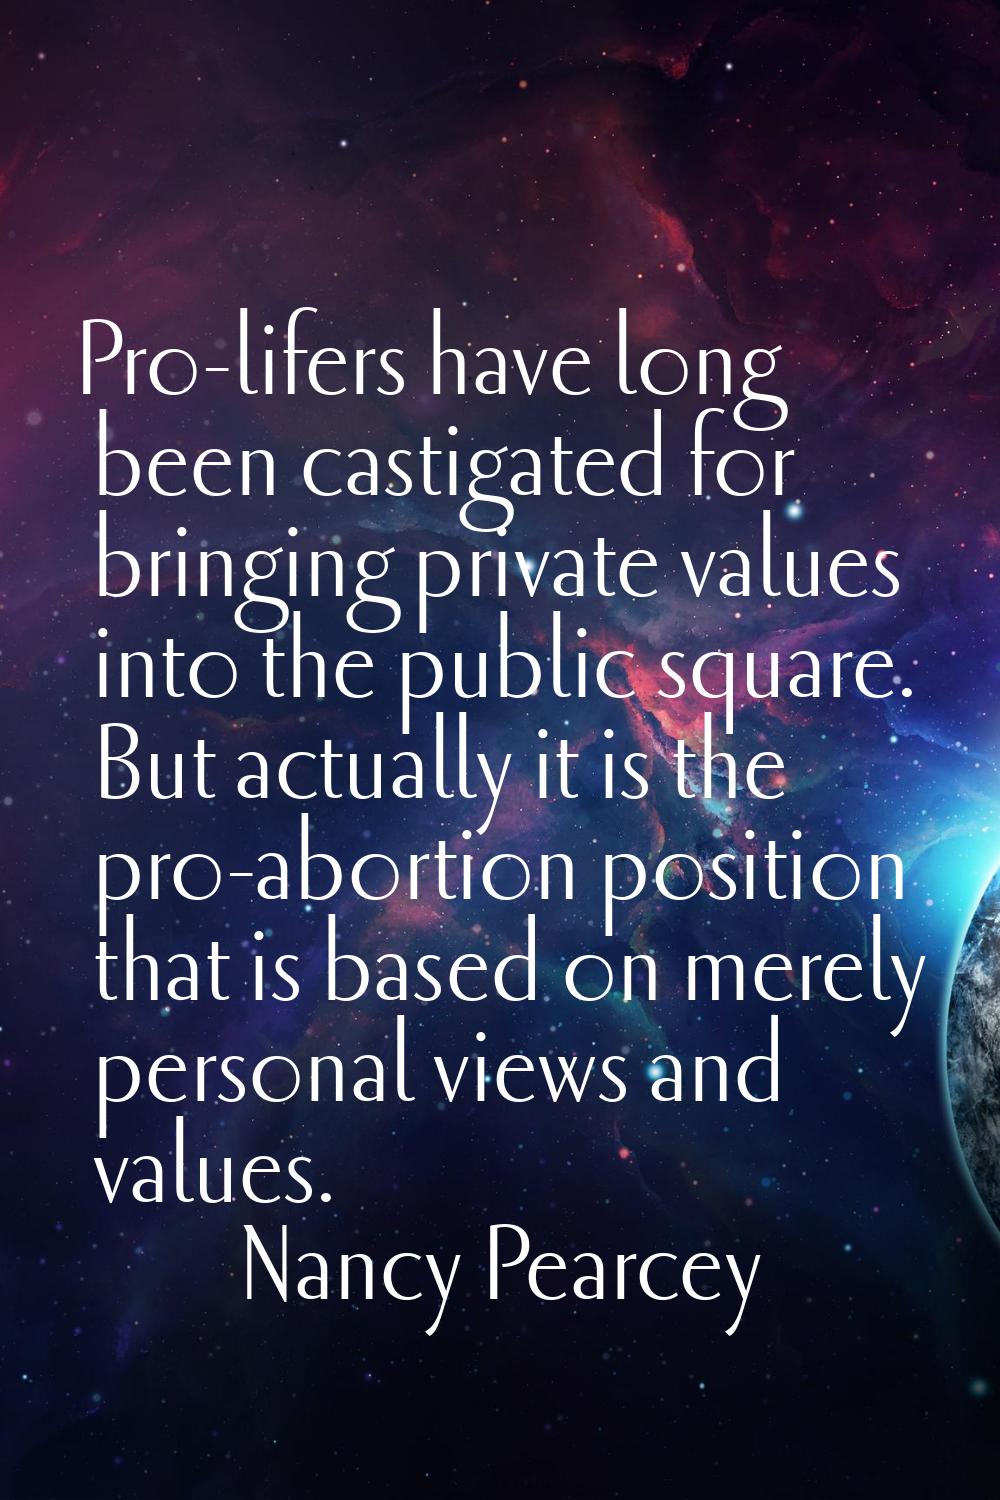 Pro-lifers have long been castigated for bringing private values into the public square. But actual